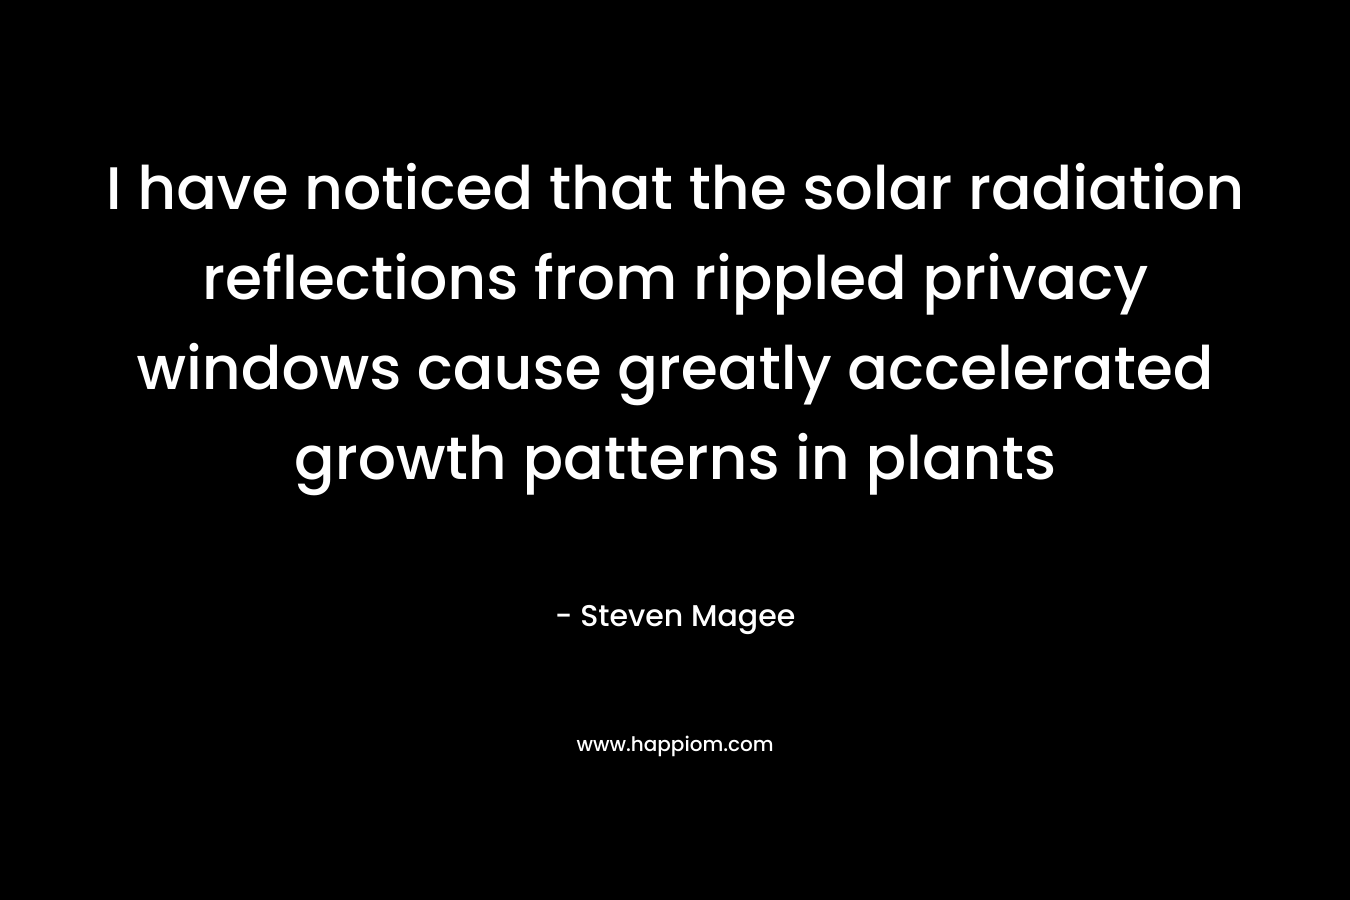 I have noticed that the solar radiation reflections from rippled privacy windows cause greatly accelerated growth patterns in plants